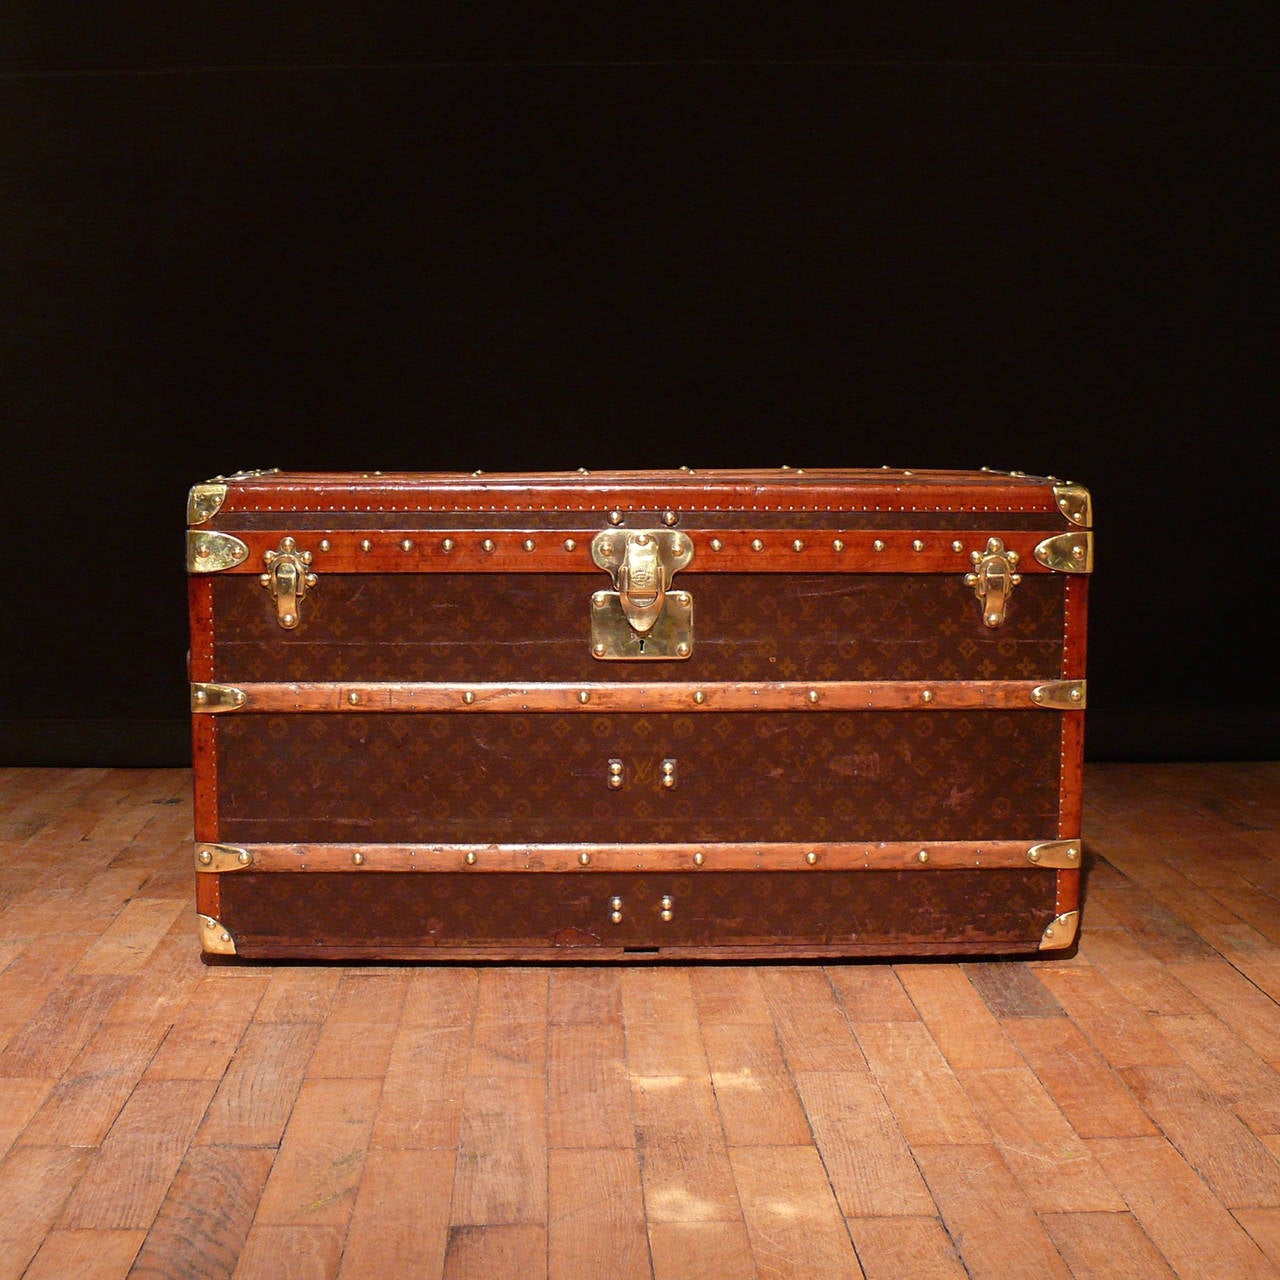 A wonderful Louis Vuitton monogram canvas shoe trunk with lozine trim, leather handles and yellow striped livery, circa 1935. Includes an original key for the trunk.

Dimensions: 91.5 cm x 39 cm x 49 cm

Member of LAPADA.